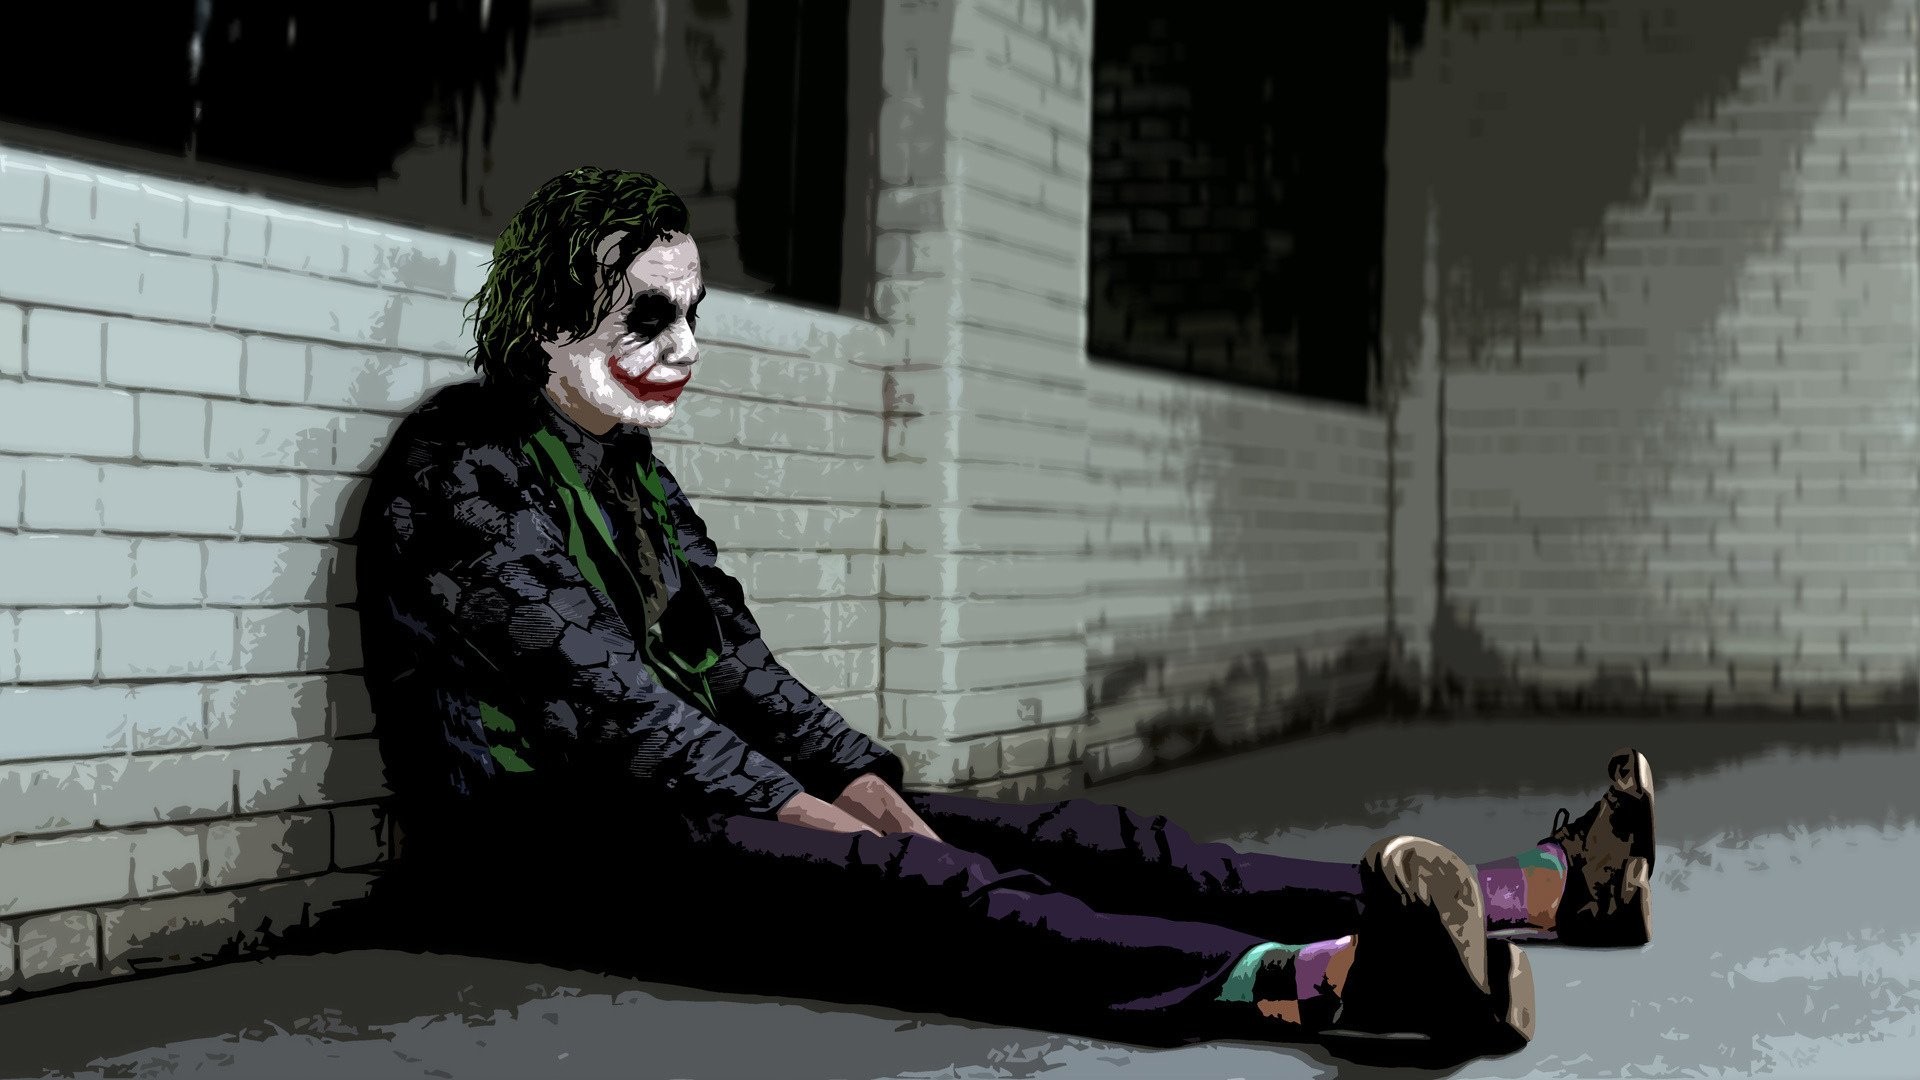 1920x1080 The Joker Wallpapers Pictures Images